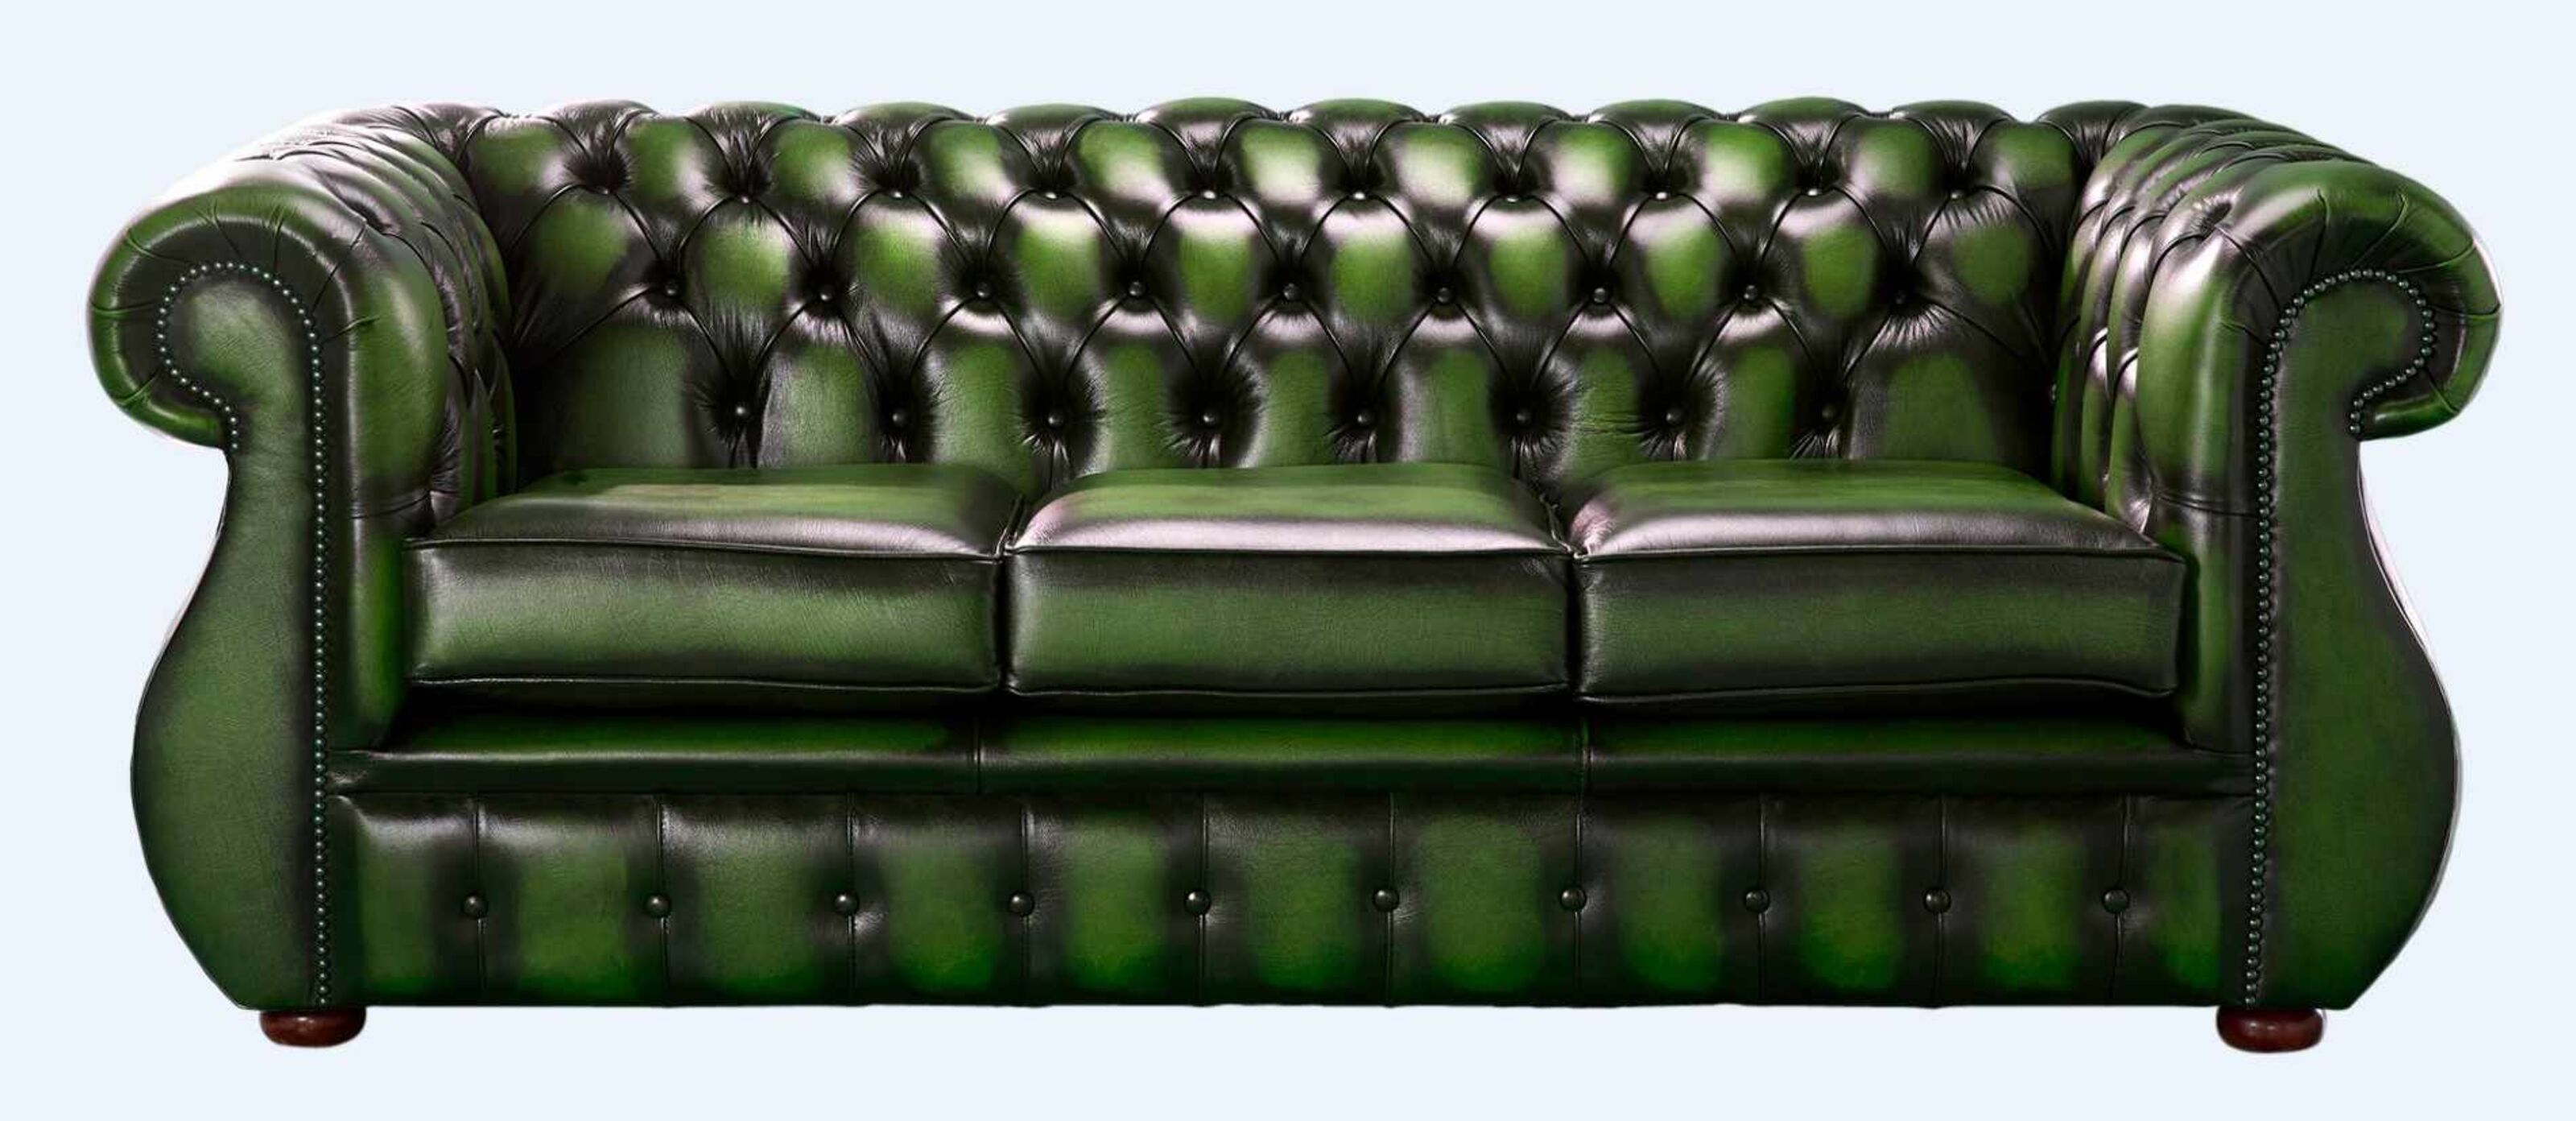 Chesterfield Sofas: Adding That Special Touch to Your Home  %Post Title